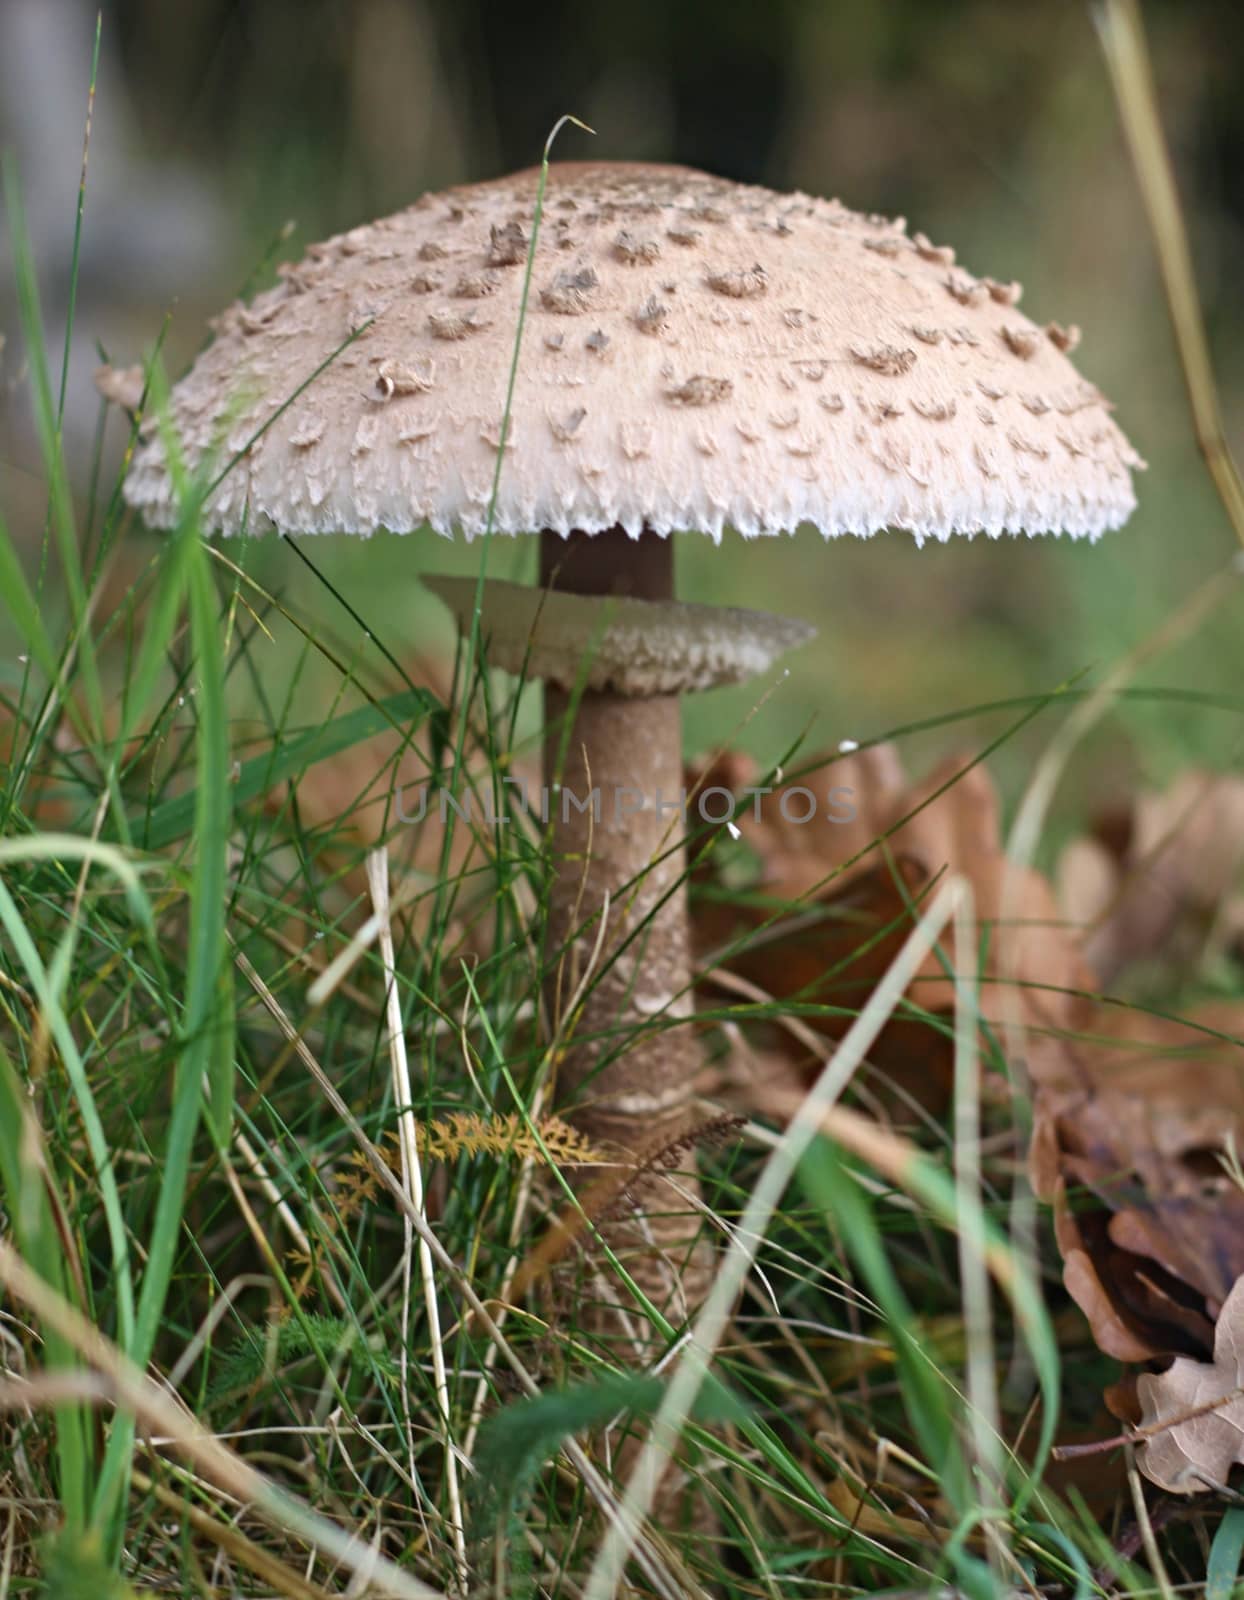 Mushroom grow on mossy ground closeup in autumn forest 